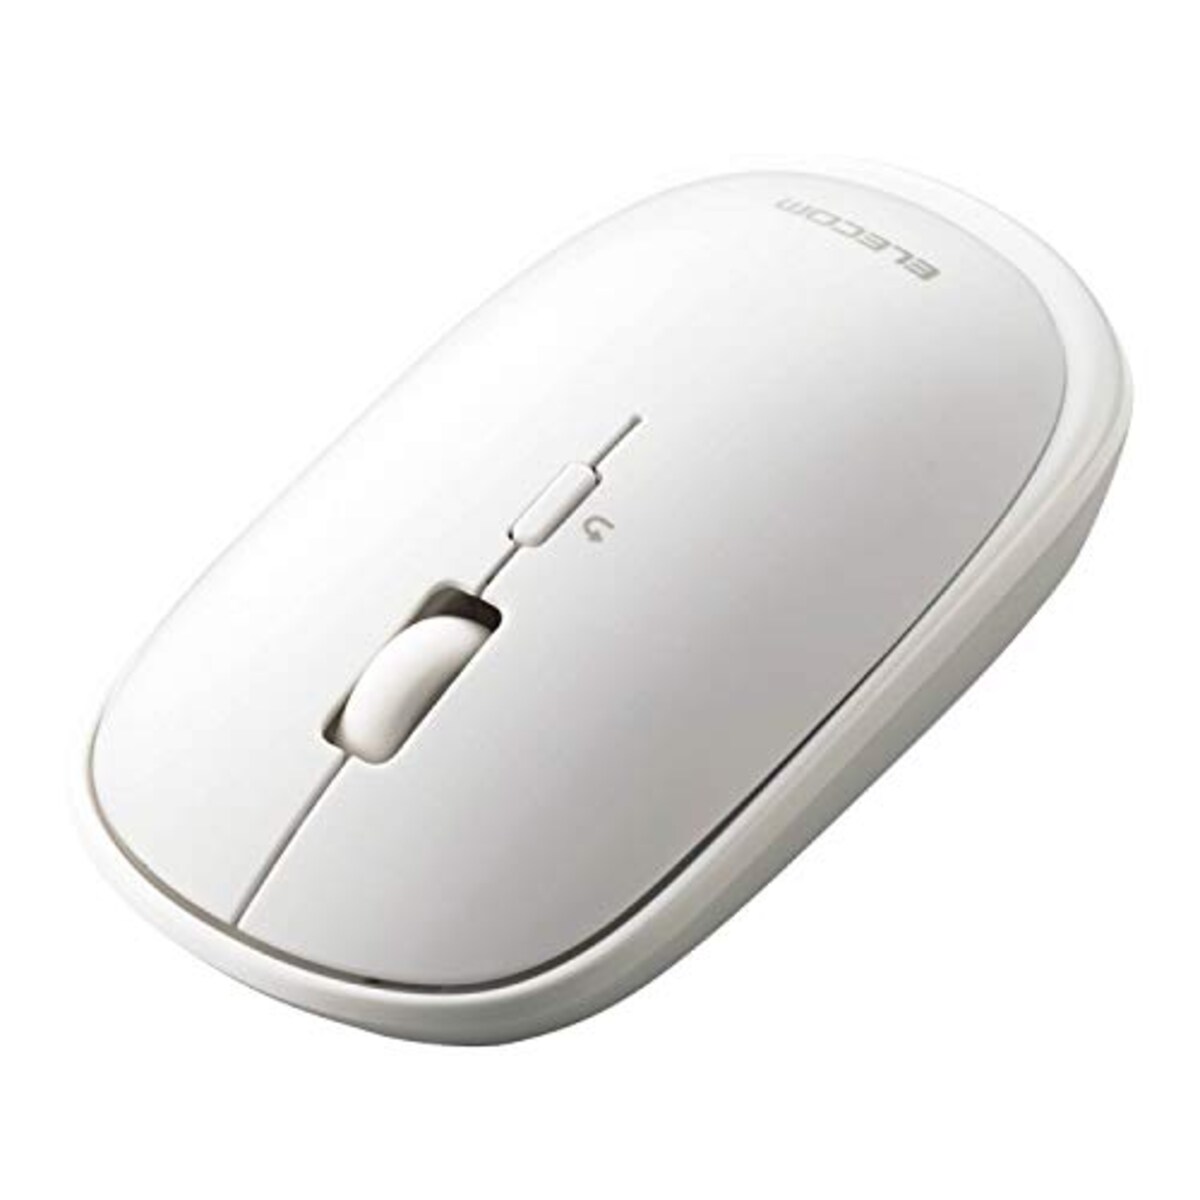 Slint Bluetooth MOBILE MOUSE